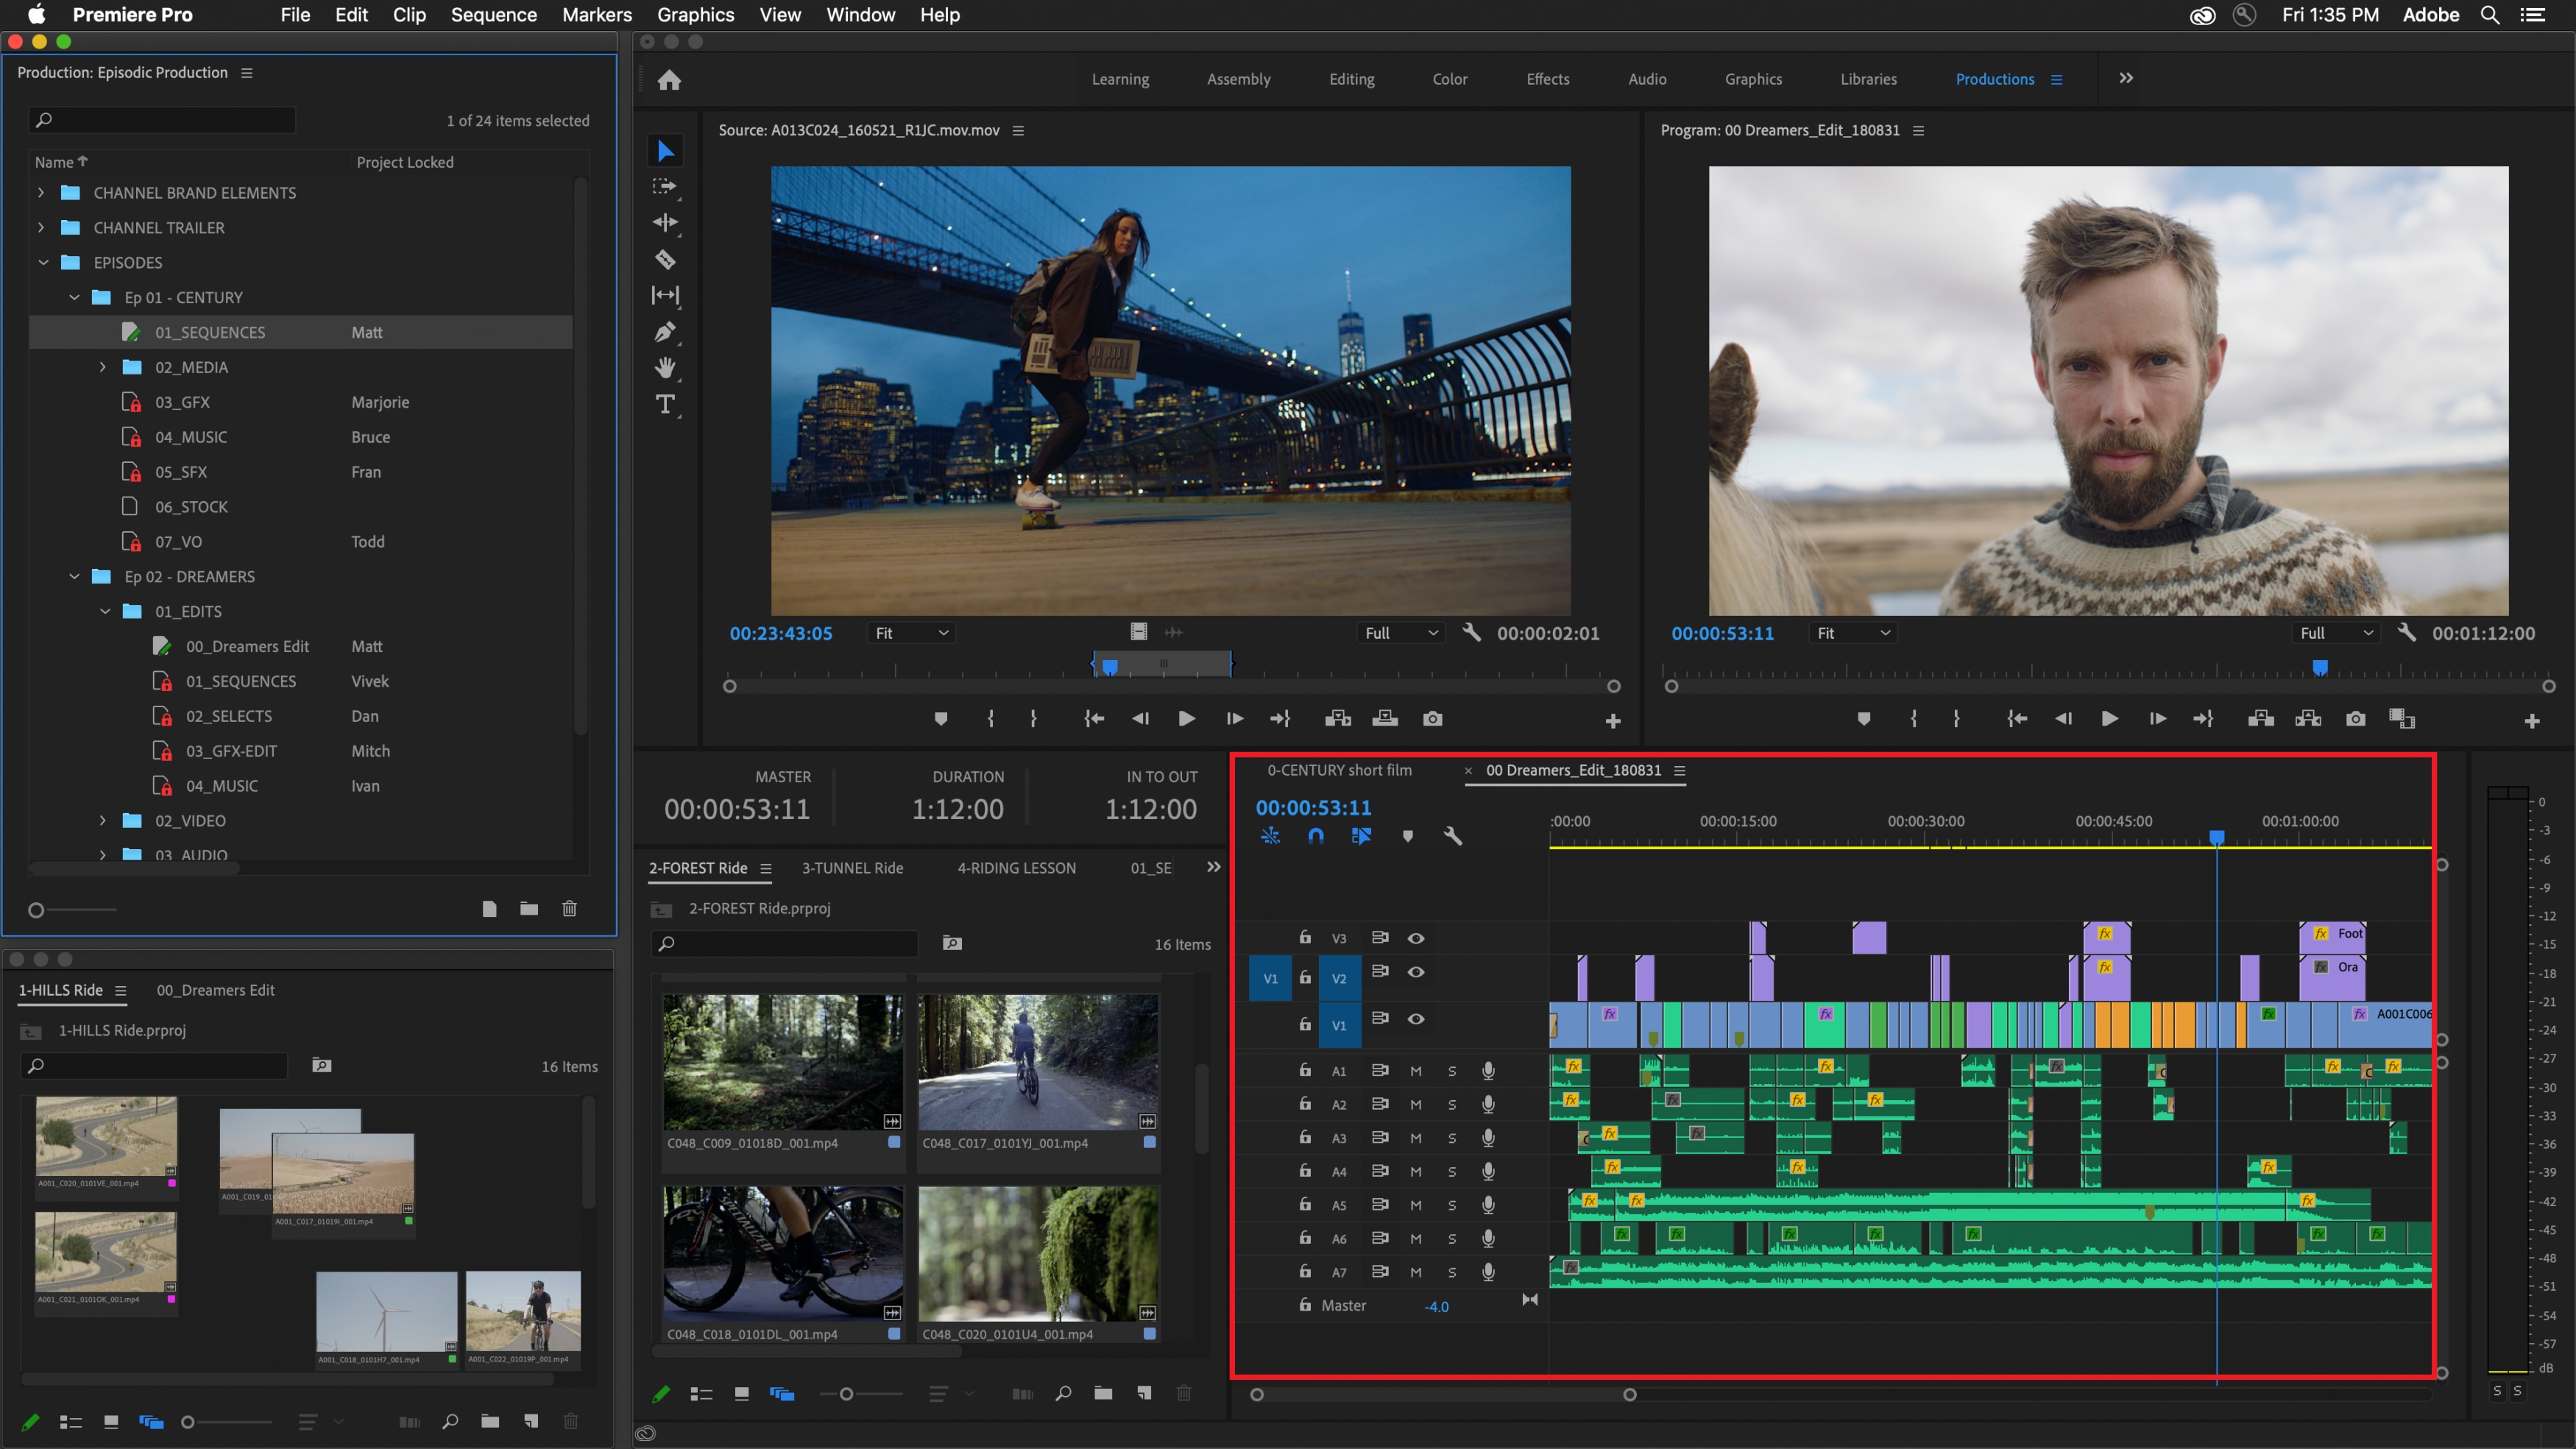 adobe premiere video editing software for pc free download